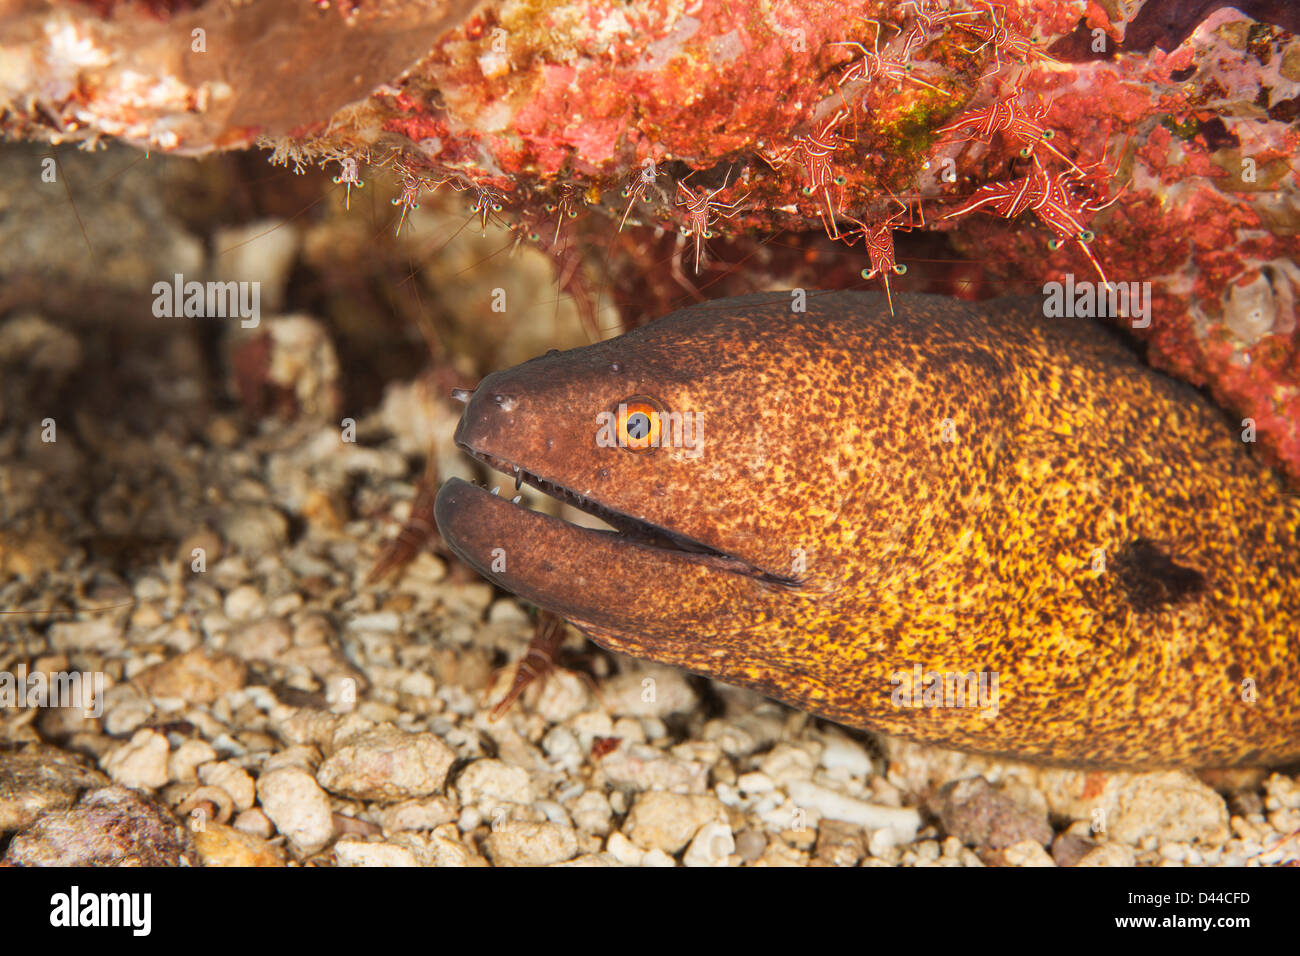 Yellowmargin Moray (Gymnothorax flavimarginatus) peering out of a crevice on a tropical coral reef with Dancing Shrimp Stock Photo